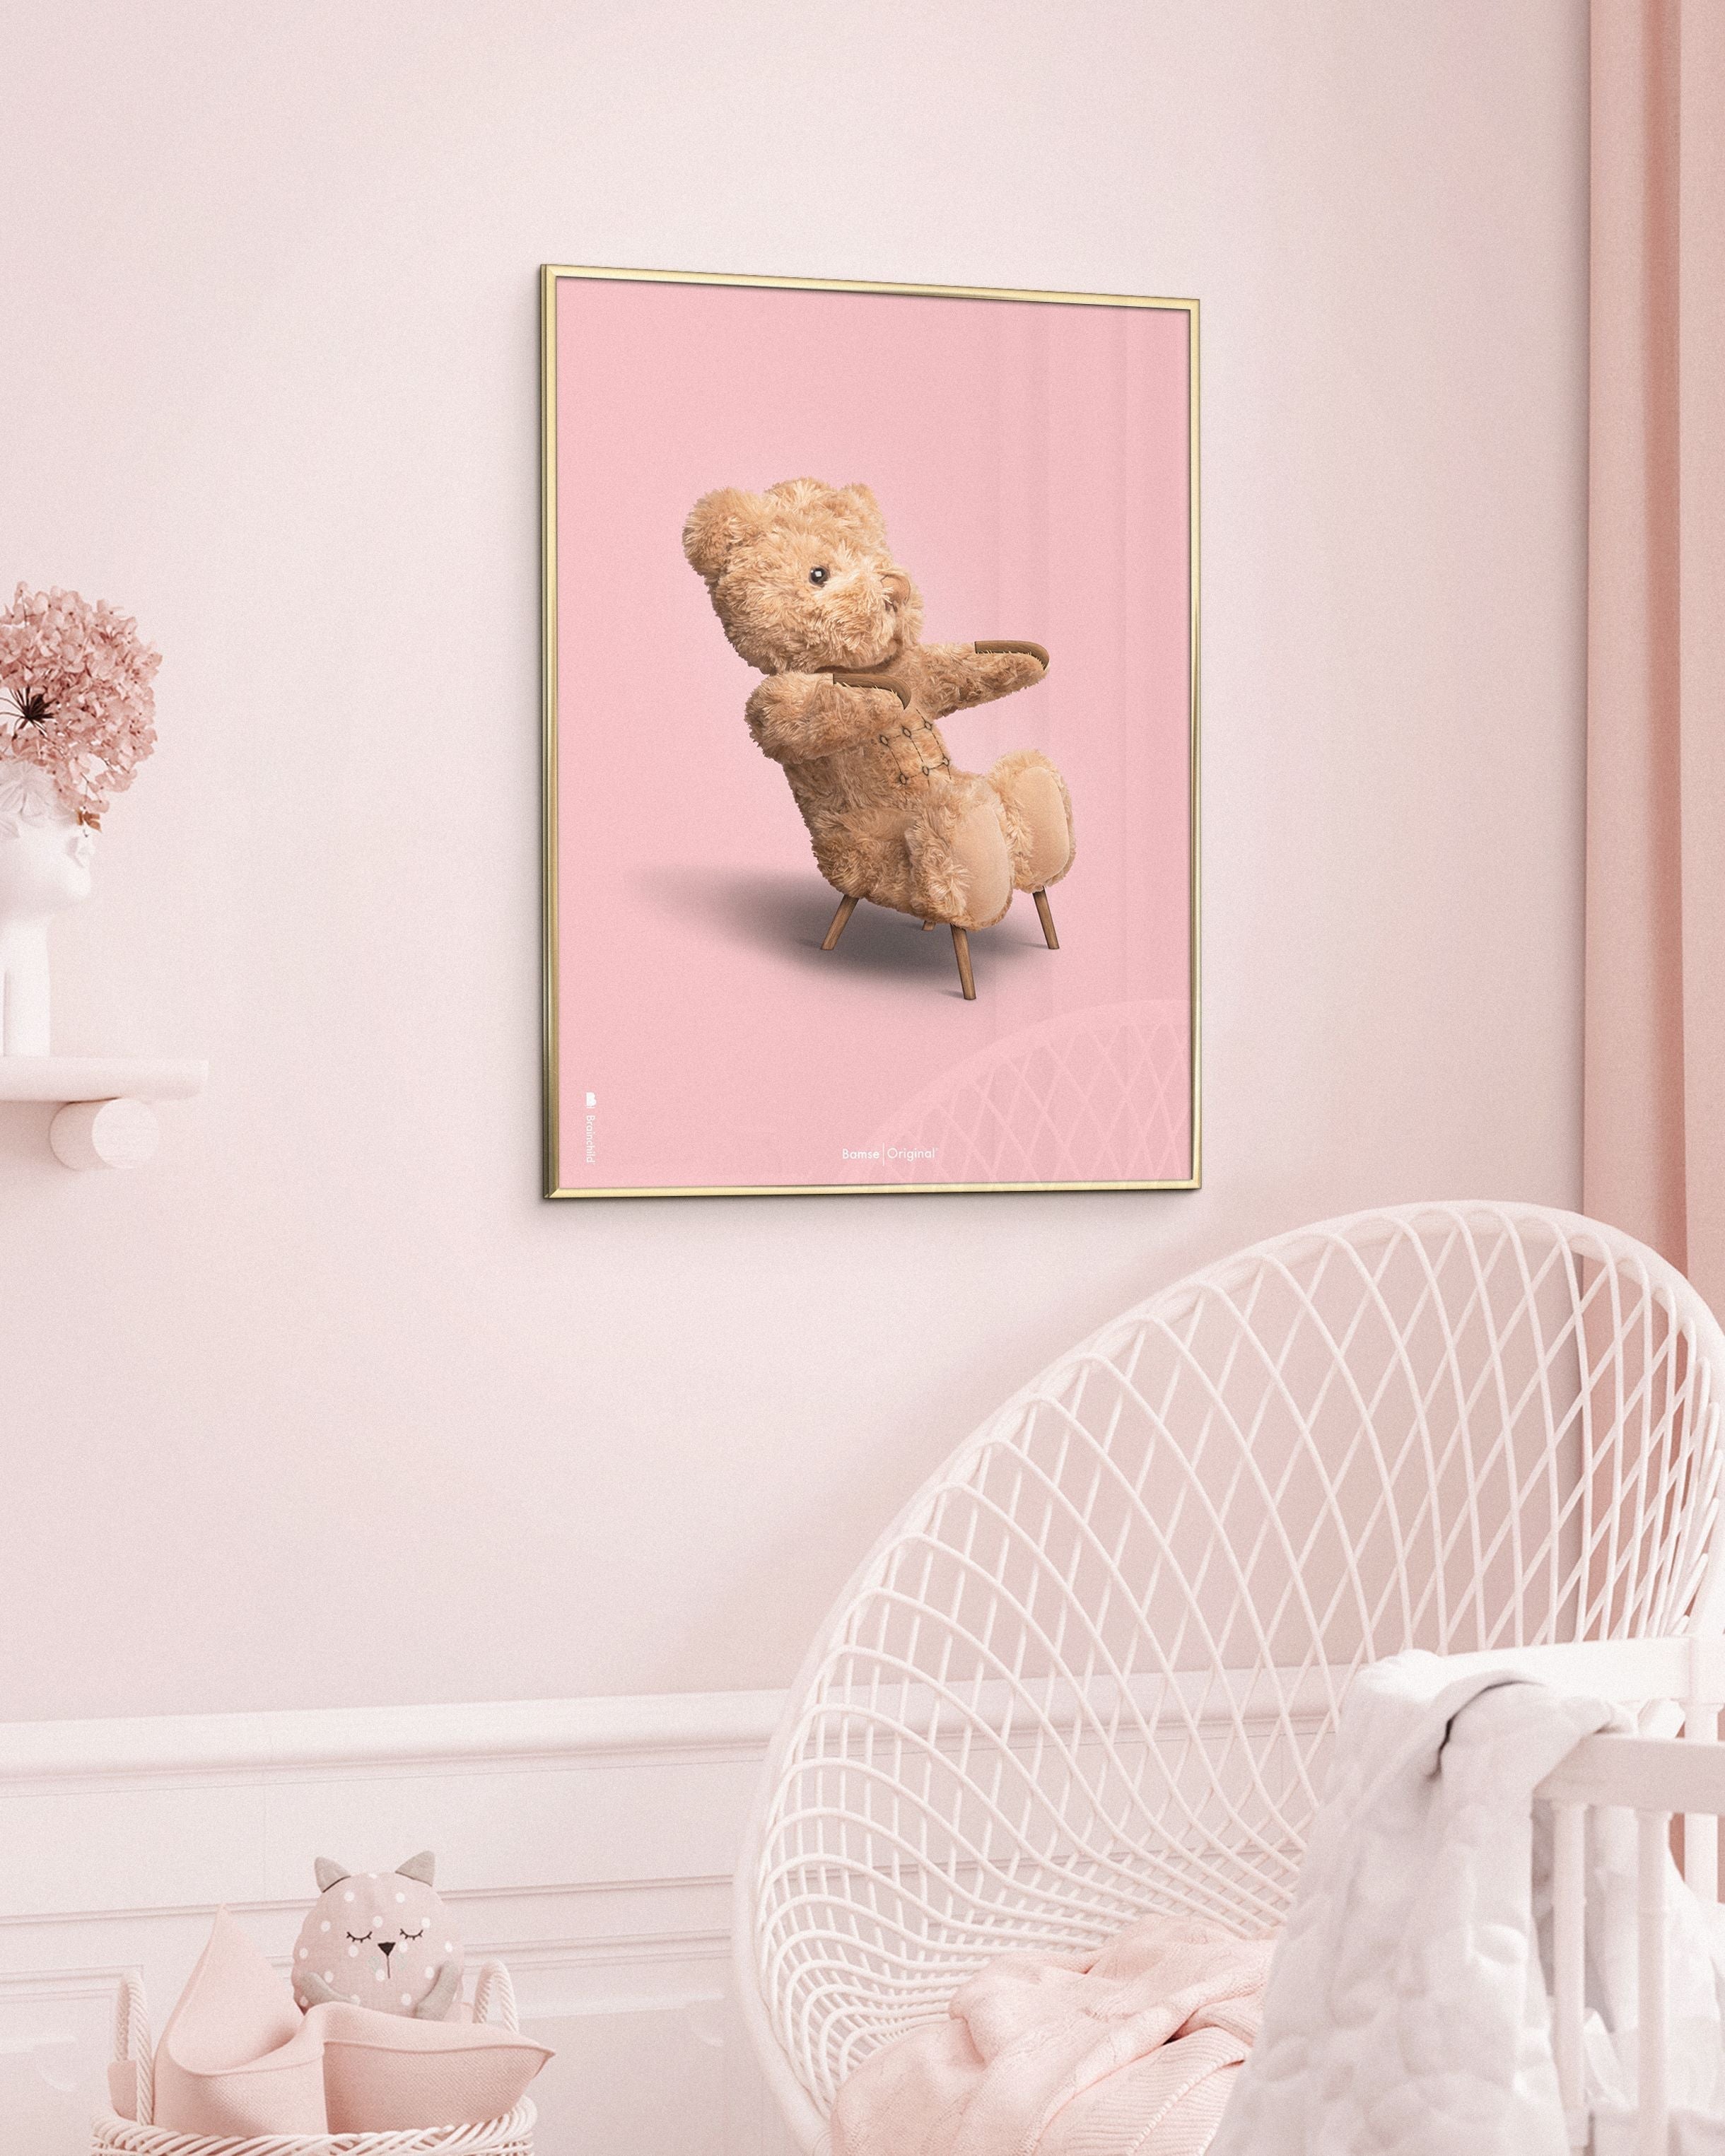 Brainchild Teddy Bear Classic Poster Frame in Black Lacquered Wood A5, Pink baggrund